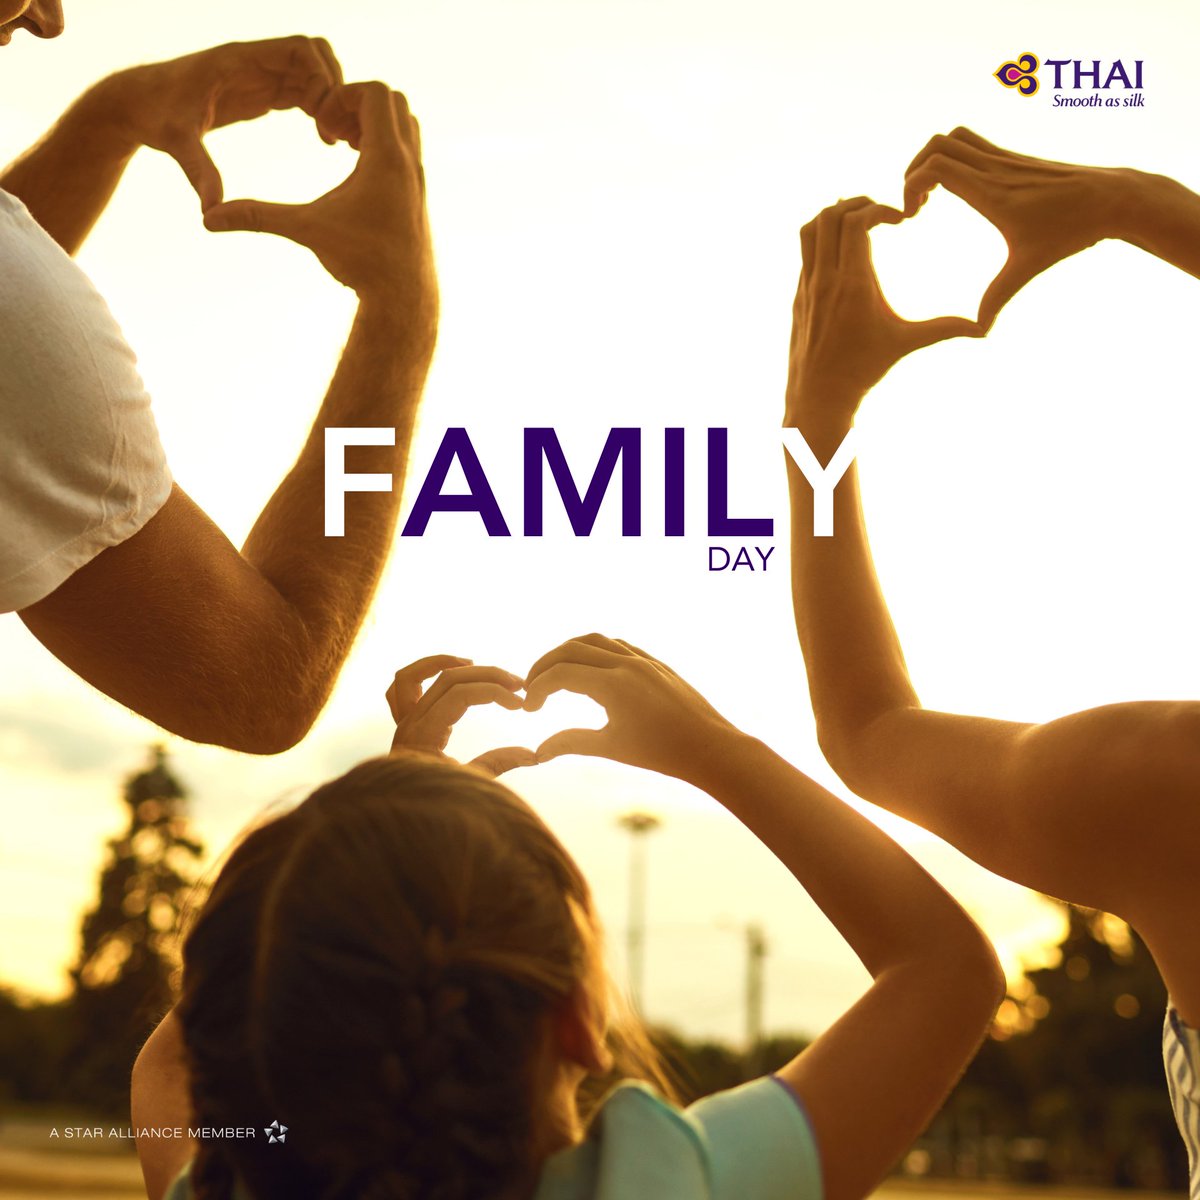 On this special Family Day, Thai Airways sends warm wishes to families everywhere! May this day be filled with laughter, love, and cherished moments spent together on Thai Airways flight, happy Family Day! 🌟👨‍👩‍👧‍👦💜

#ThaiAirways #FamilyDay #love